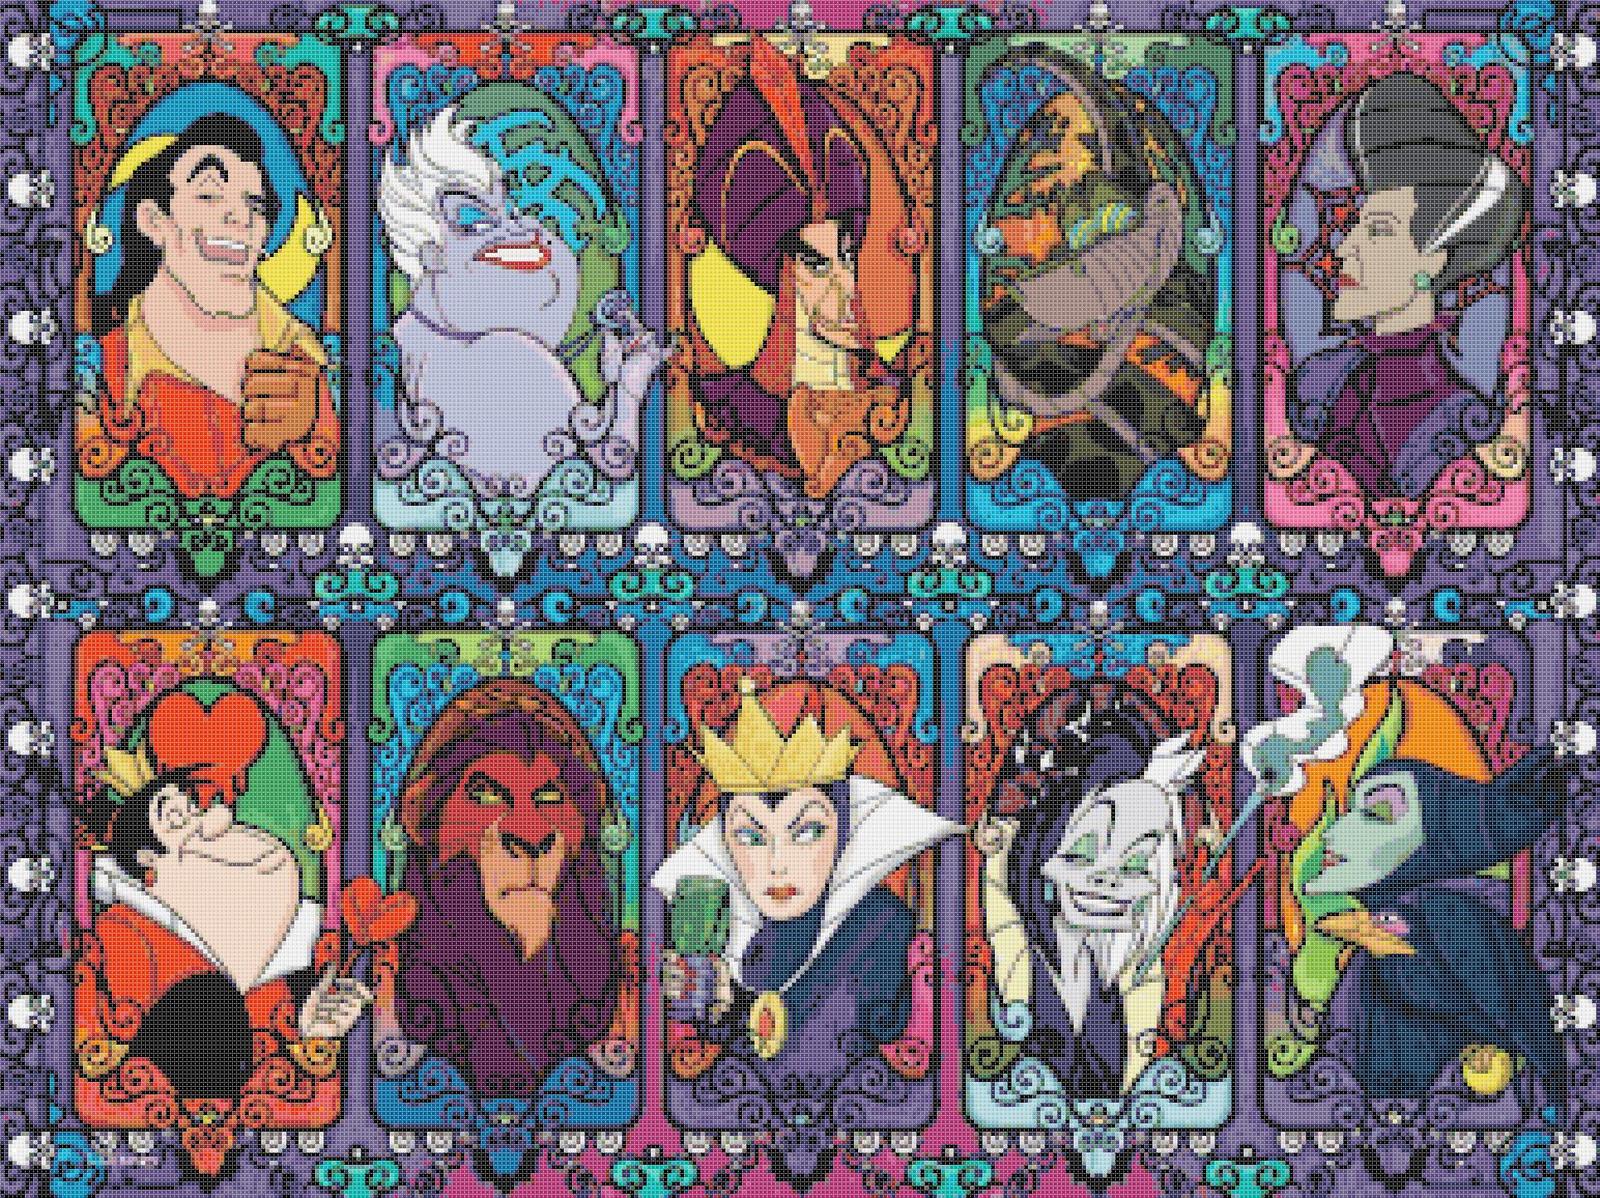 counted cross stitch pattern Disney villains embroidery 386x289 stitches BN2038